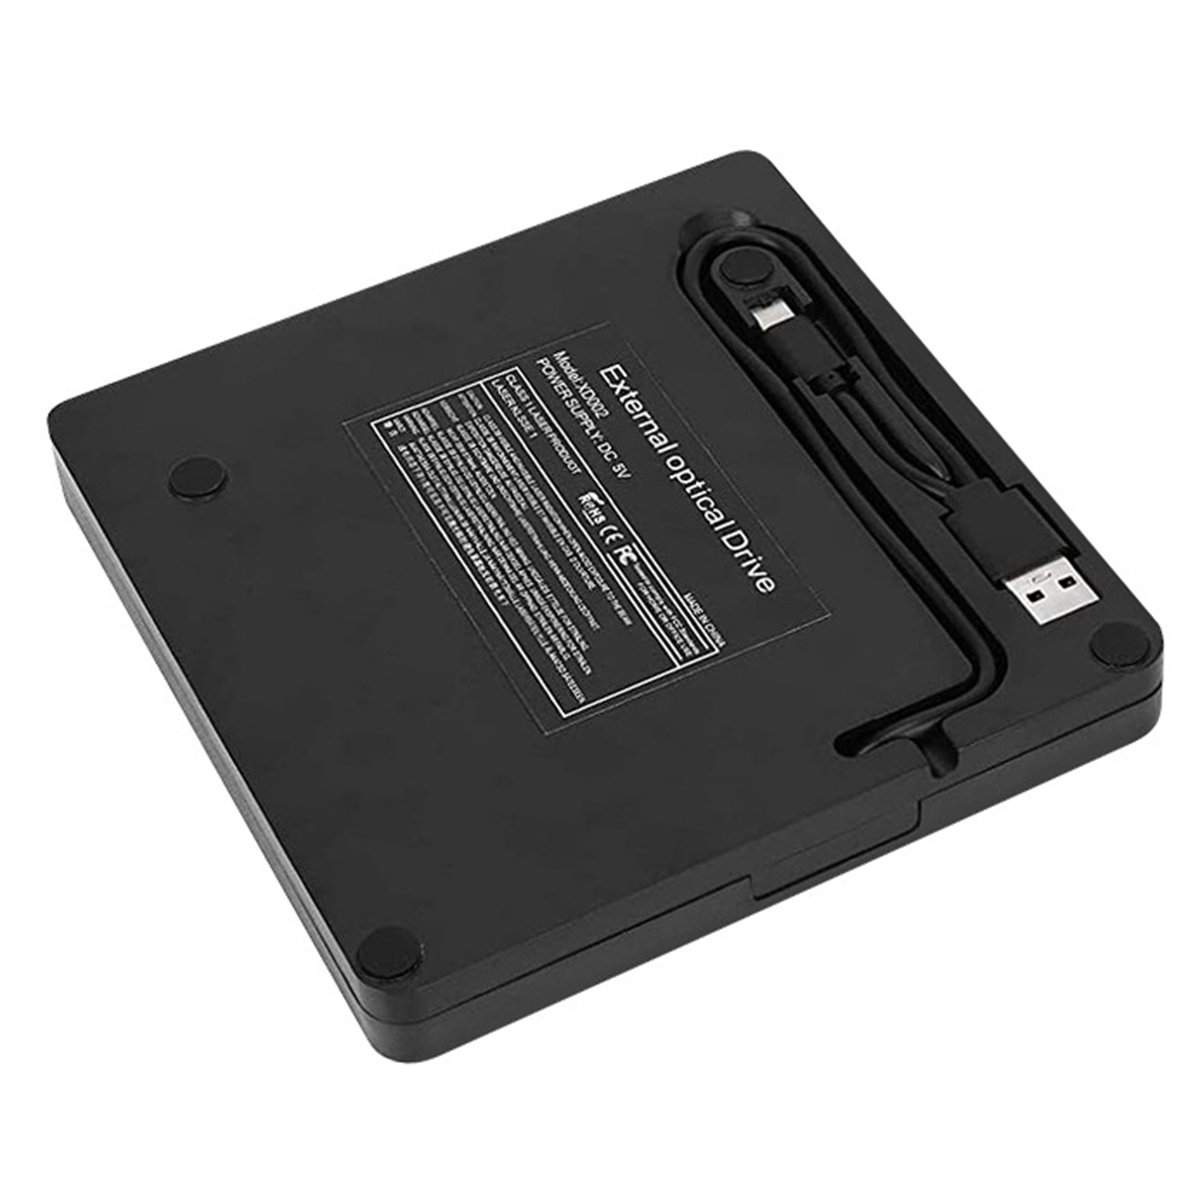 Find USB3 0 Type C External CD DVD Optical Drive High Speed Data Transfer External DVD RW Player External Burner Writer Rewriter for Computer PC Laptop XD0065 for Sale on Gipsybee.com with cryptocurrencies